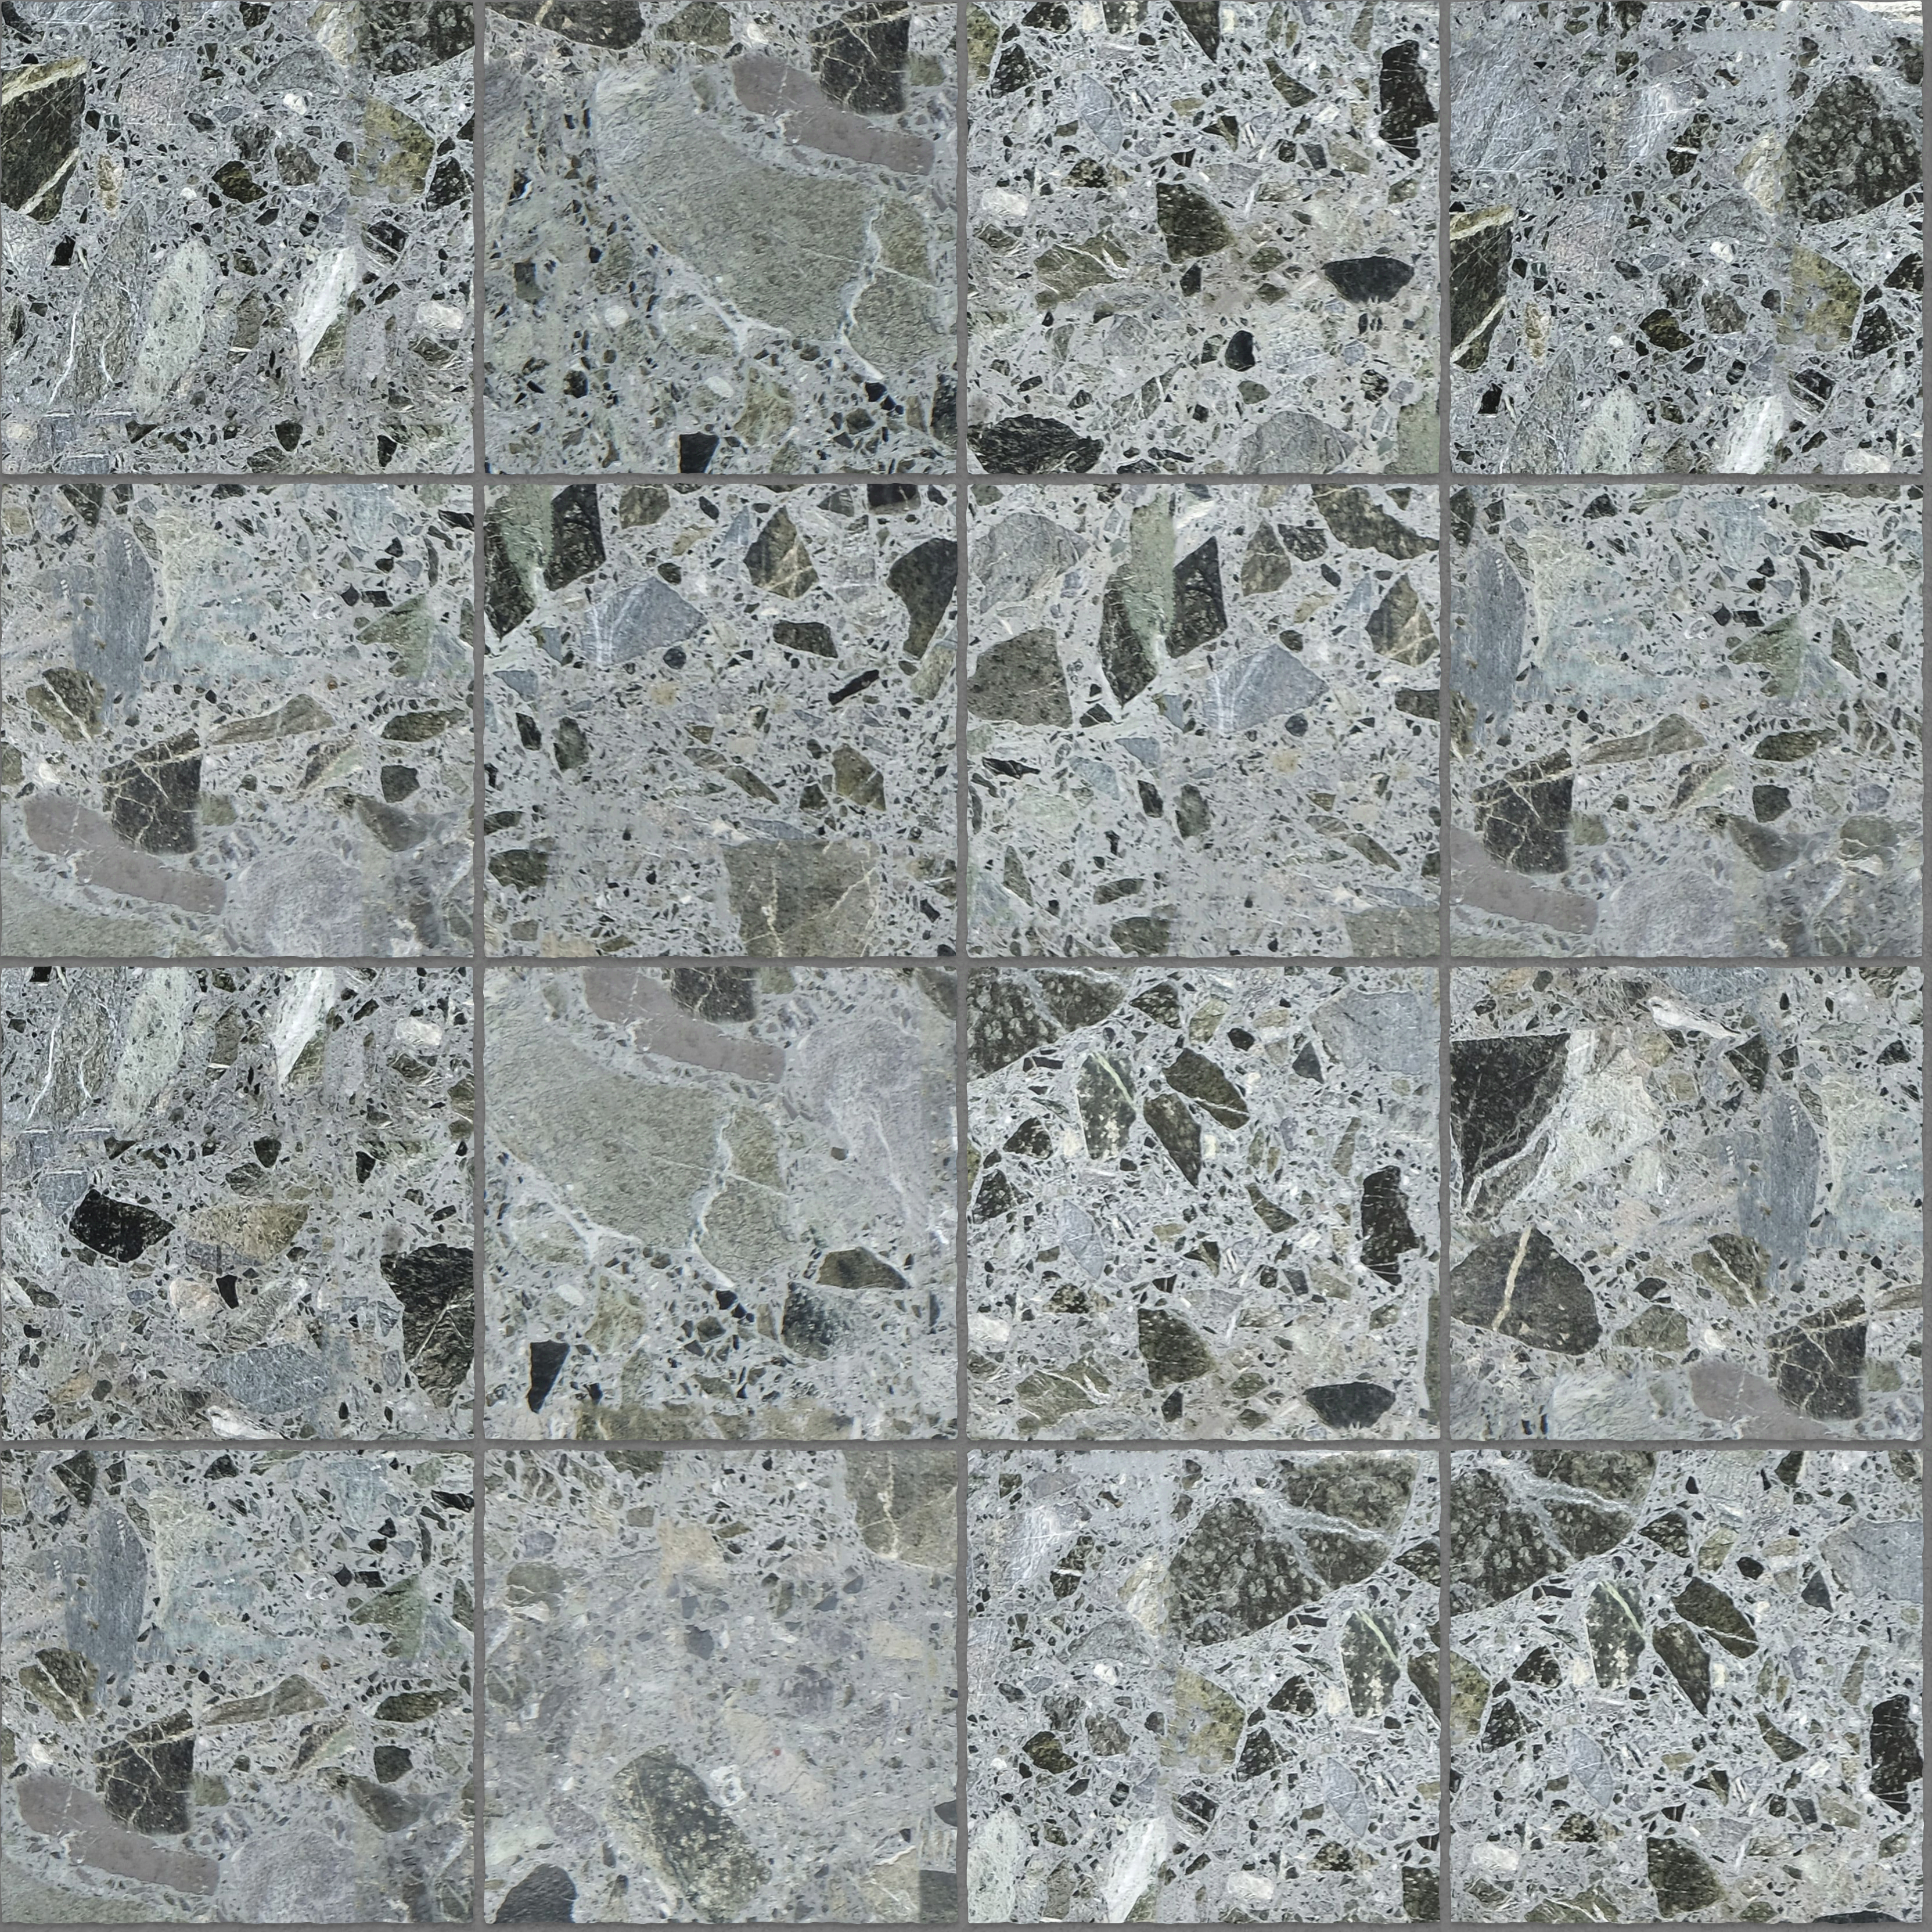 A seamless concrete texture with meadow terrazzo blocks arranged in a Stack pattern